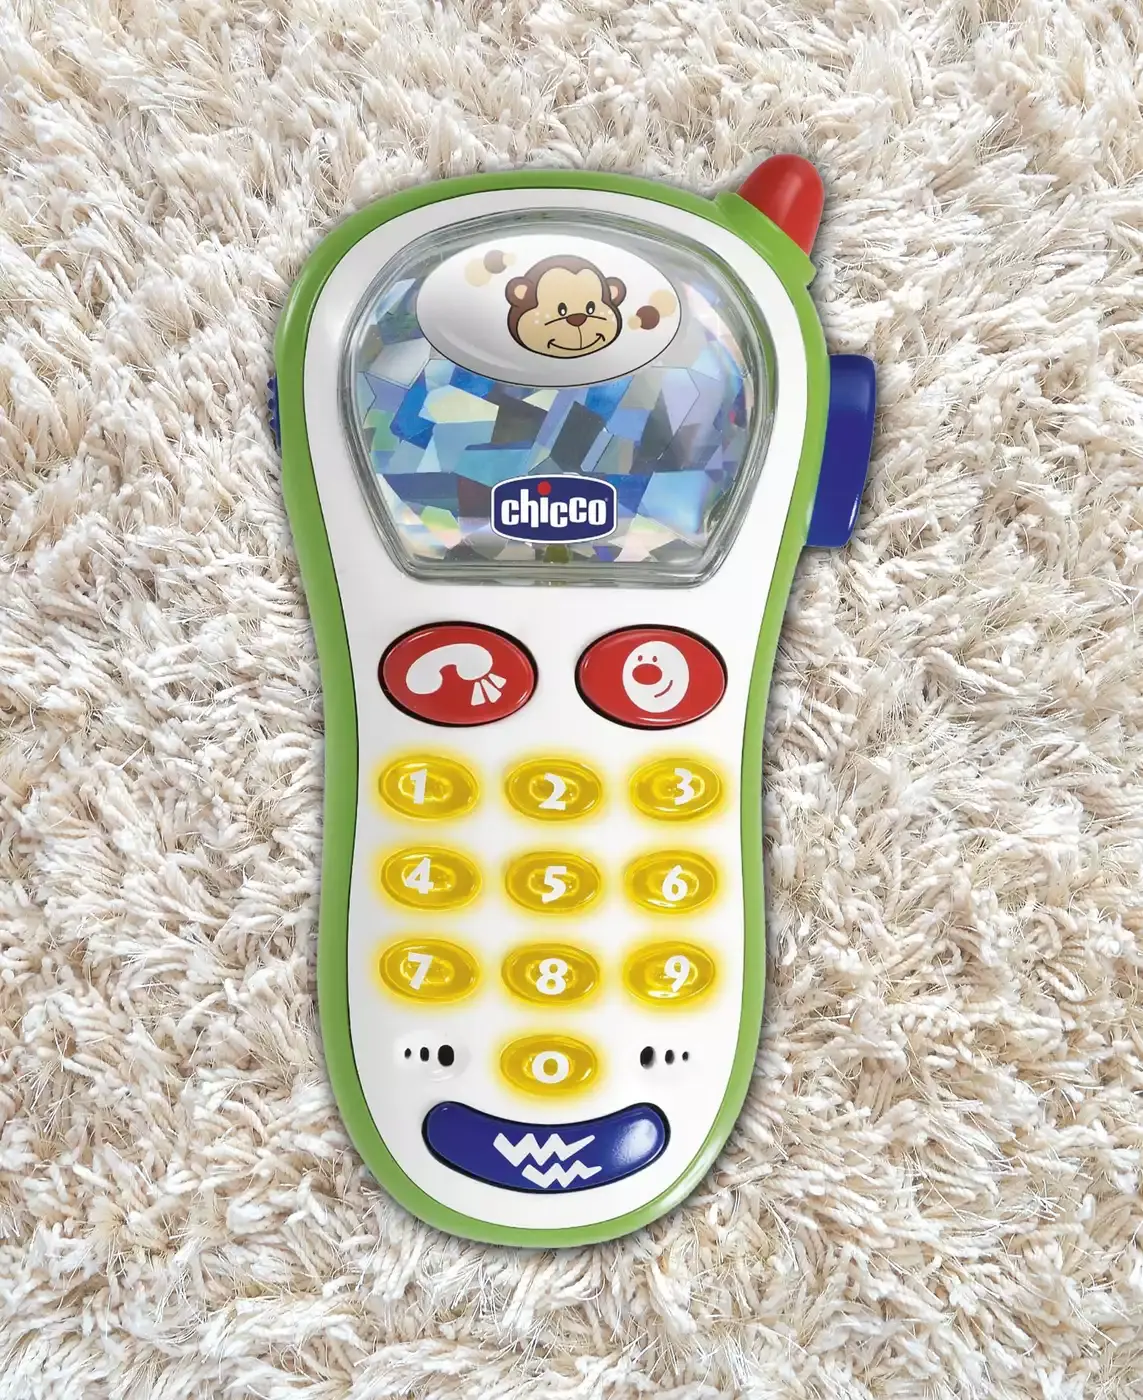 Baby's Fotohandy chicco Mehrfarbig 2000555079306 2